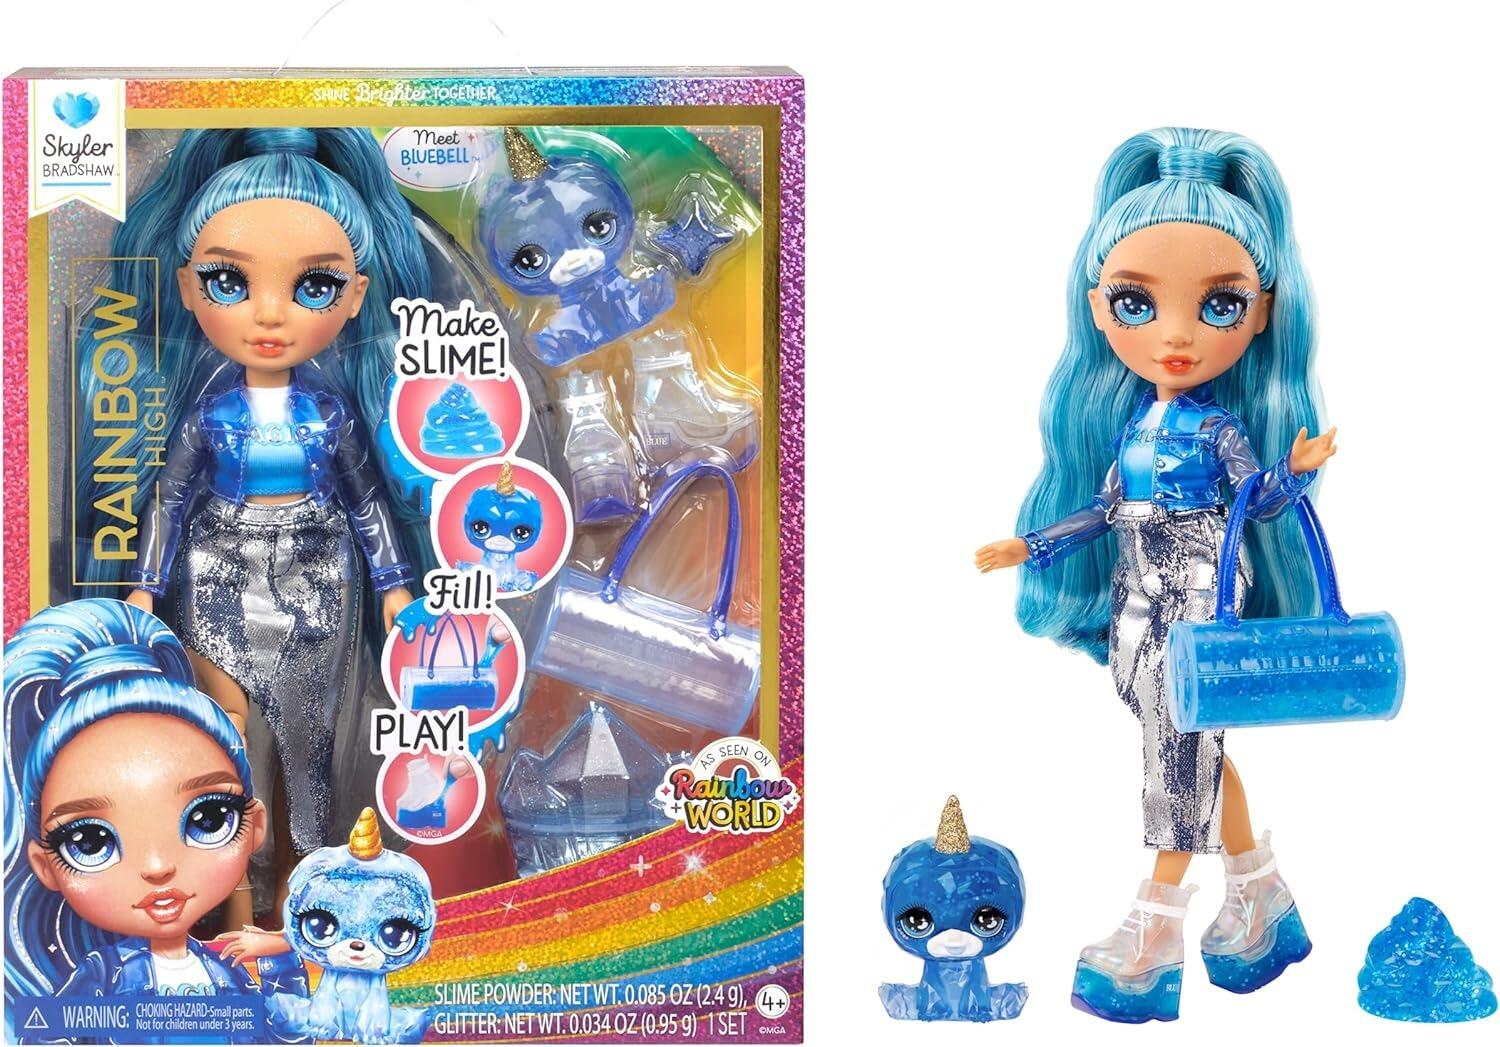 Rainbow High Skyler (Blue) with Slime Kit & Pet - Blue 11” Shimmer Doll  with DIY Sparkle Slime, Magical Yeti Pet and Fashion Accessories